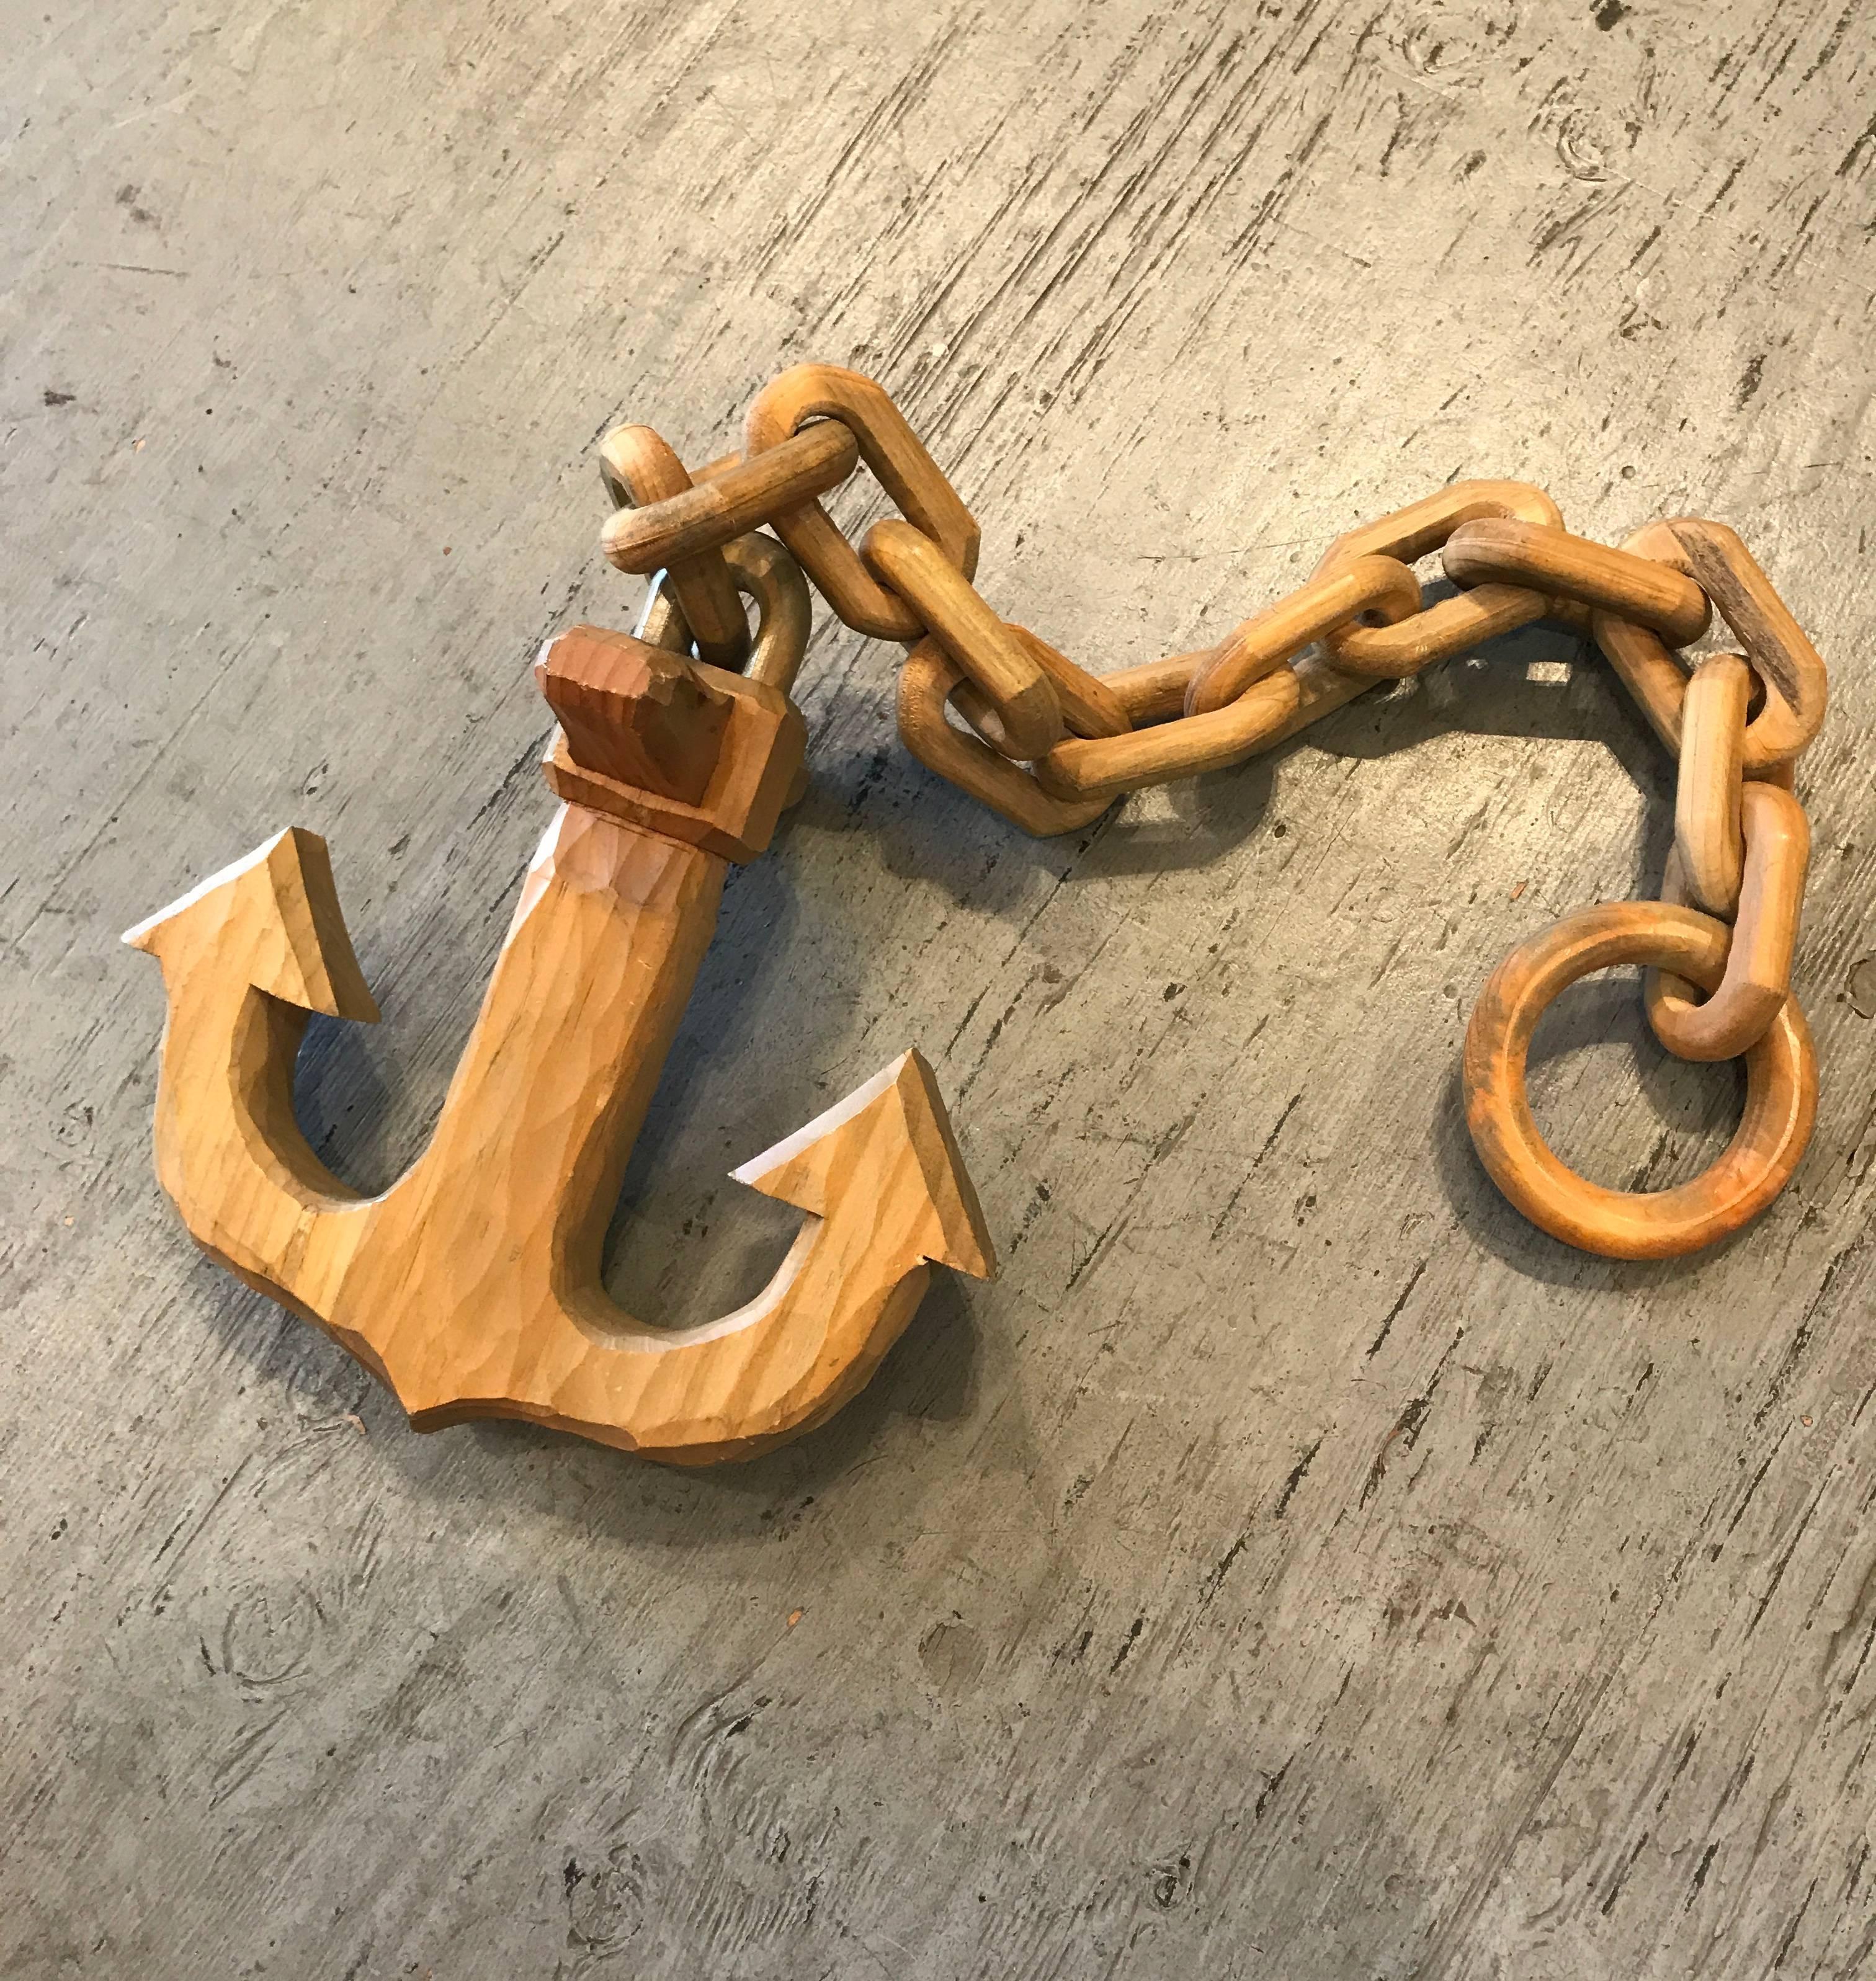 Nautical Folk Art Hand-Carved Wooden Boat Anchor and Chain In Good Condition For Sale In San Francisco, CA